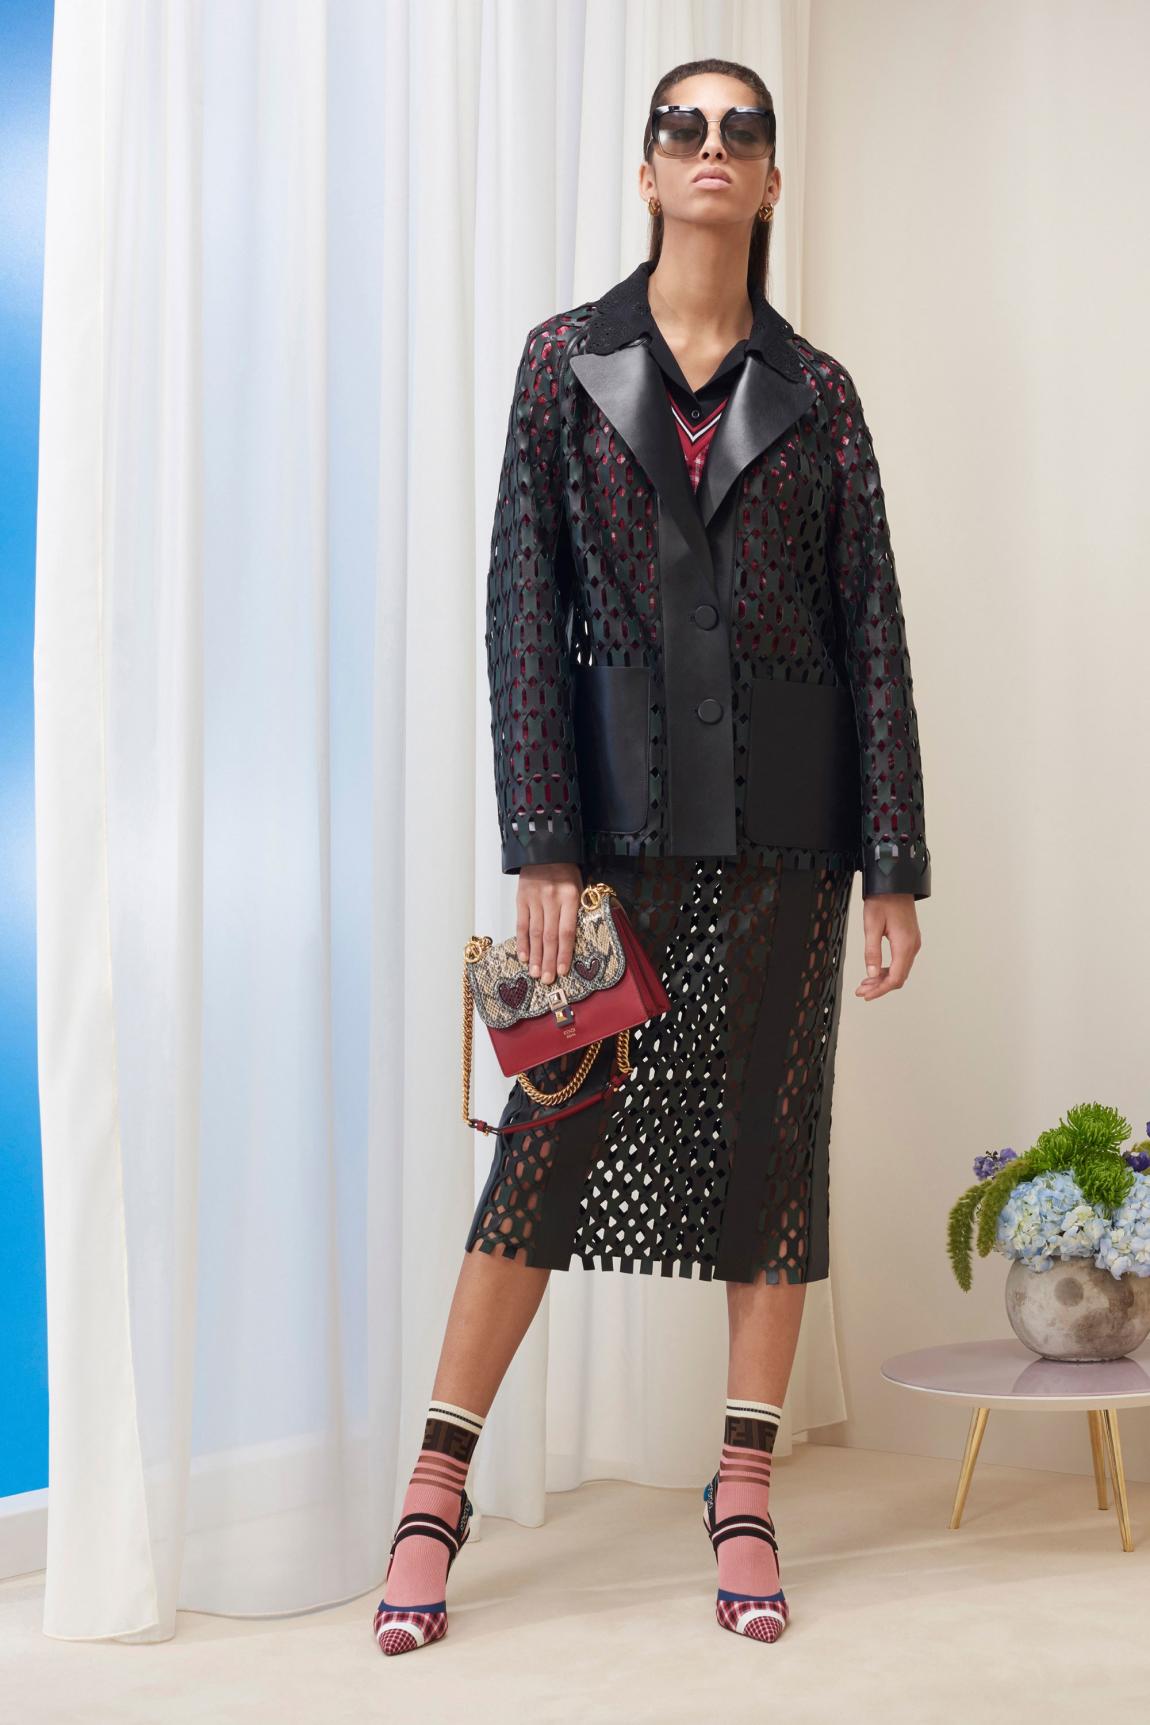 Pre-Fall Fendi collection as though created for Valentine's Day